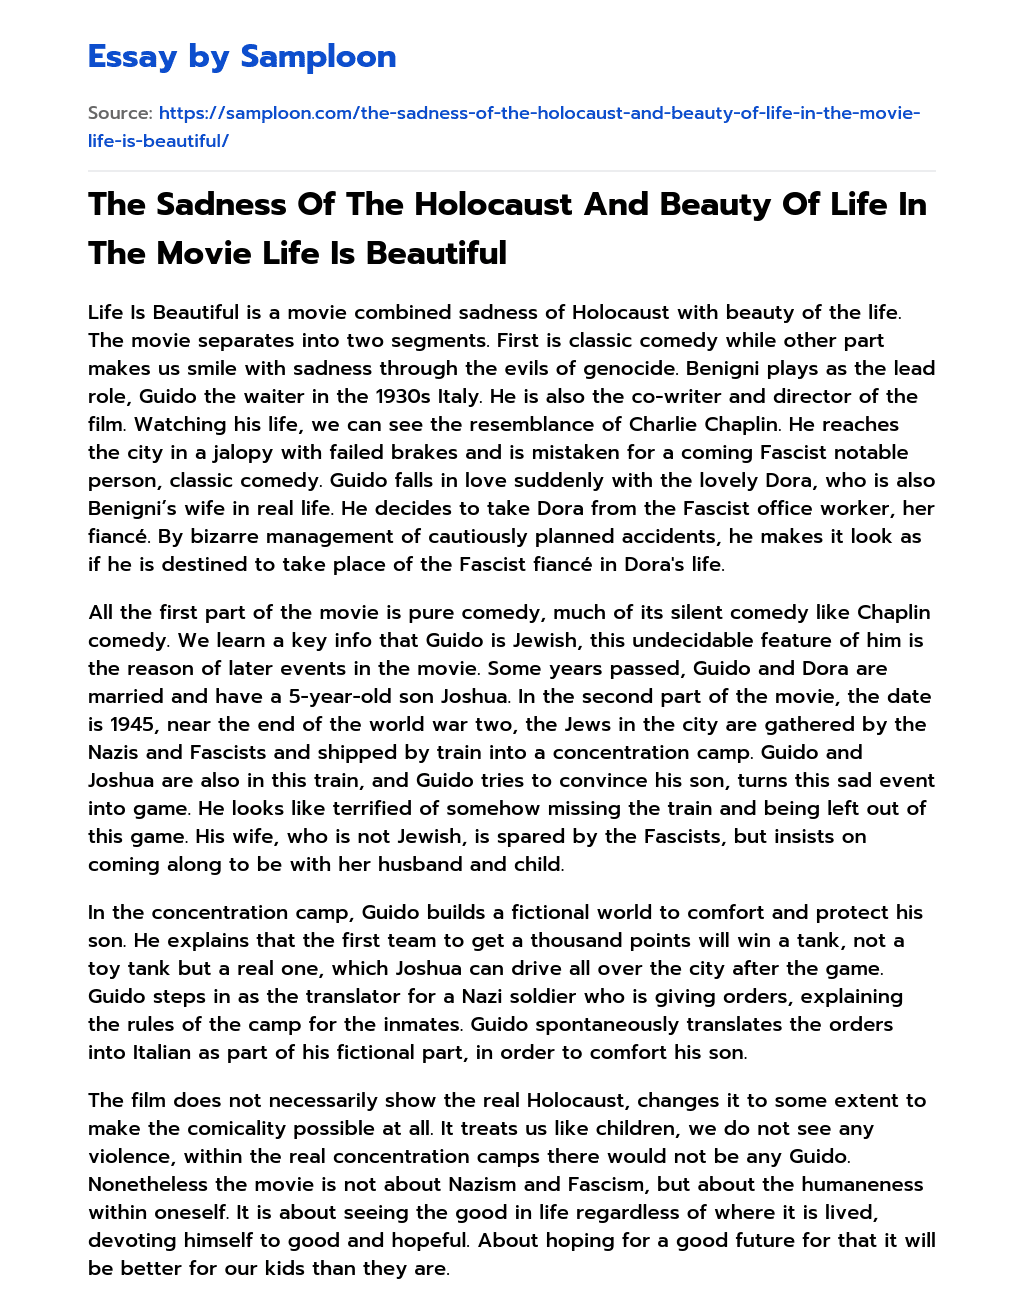 The Sadness Of The Holocaust And Beauty Of Life In The Movie Life Is Beautiful essay